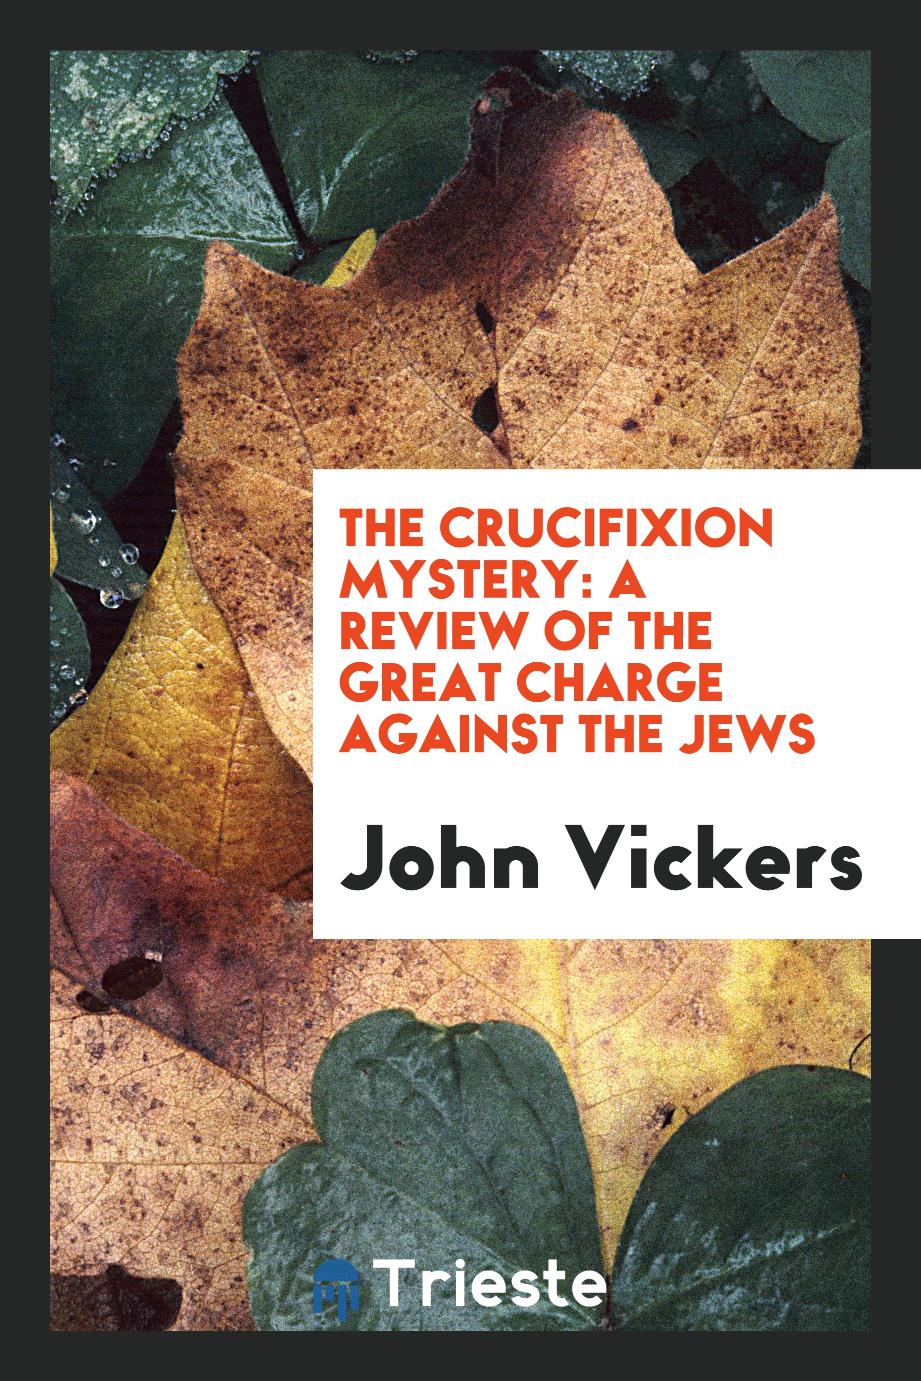 The Crucifixion Mystery: A Review of the Great Charge Against the Jews